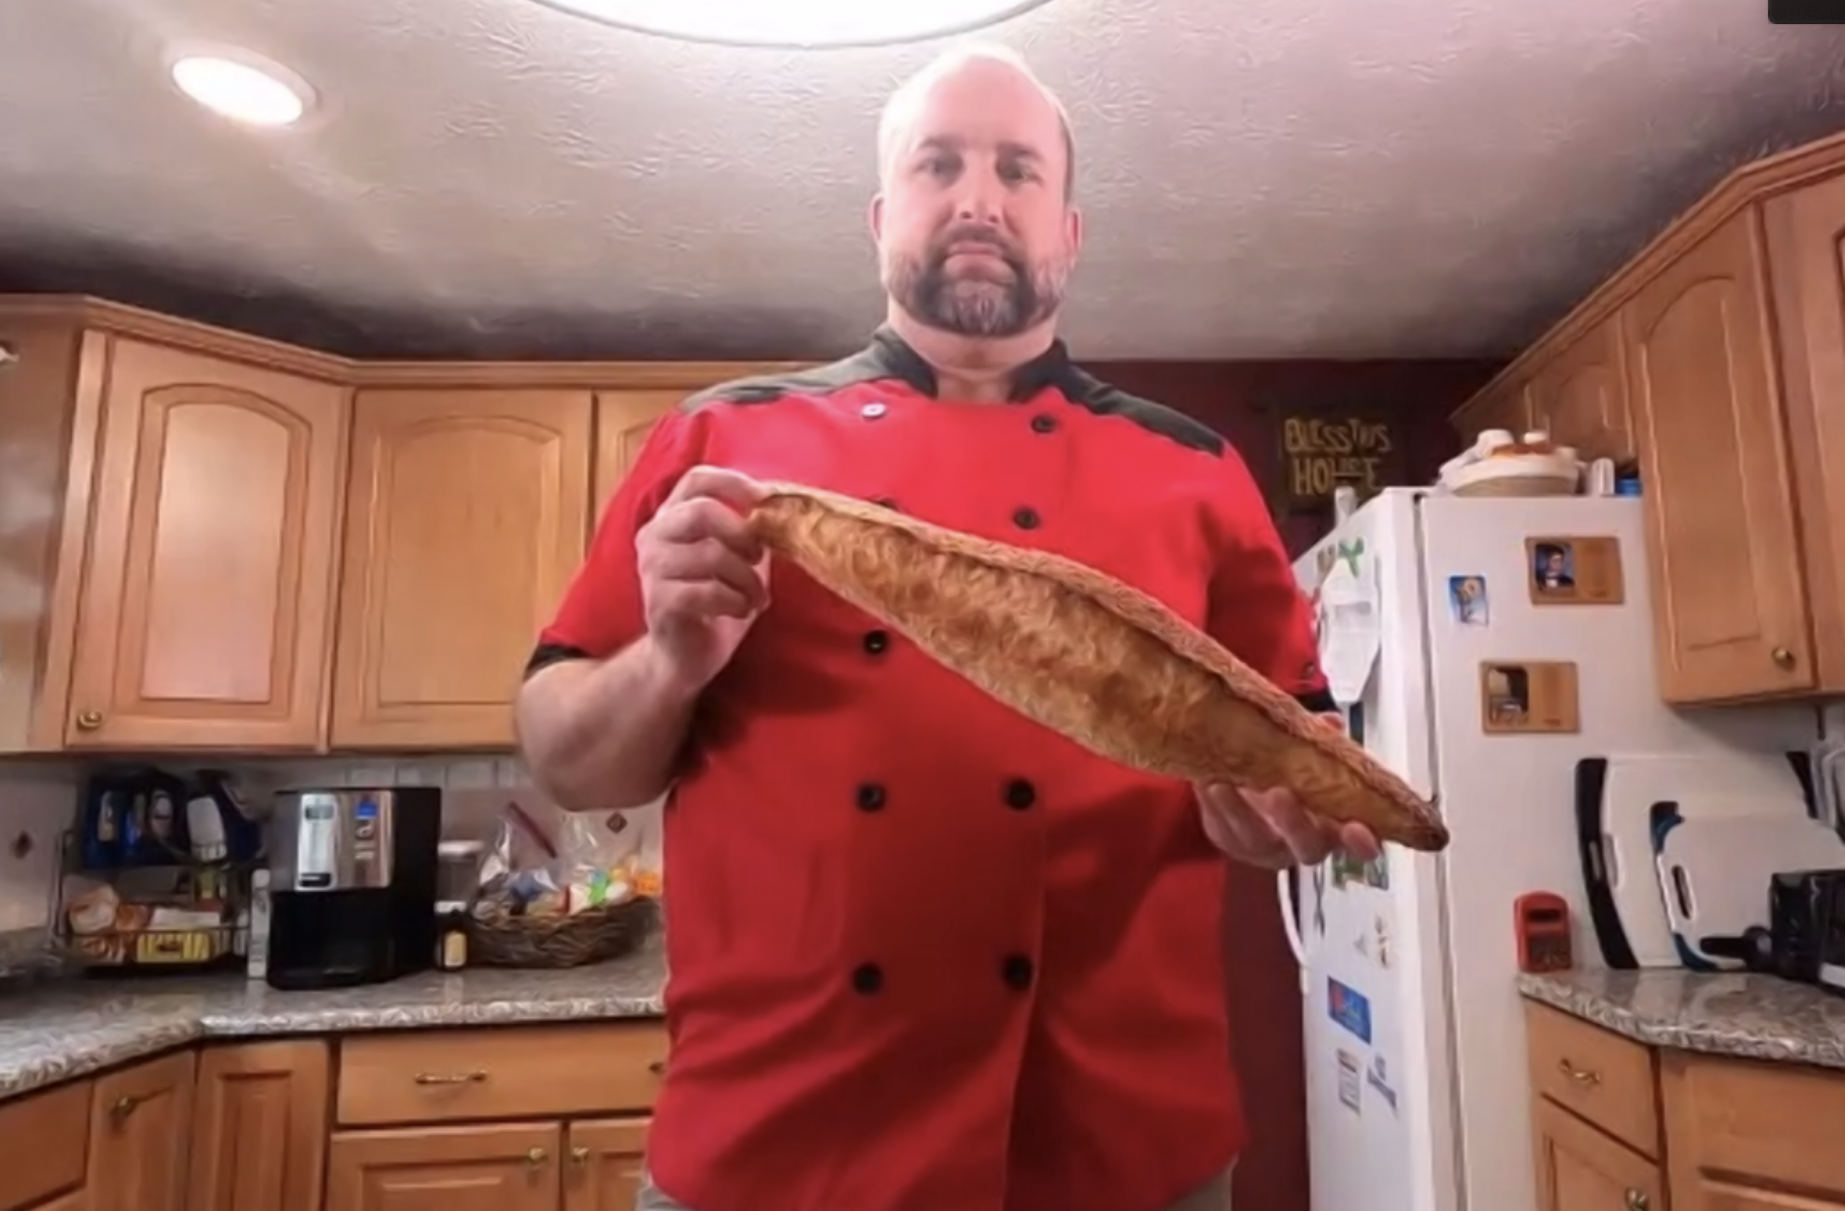 Staff hosts a cooking demo, holding a loaf of bread